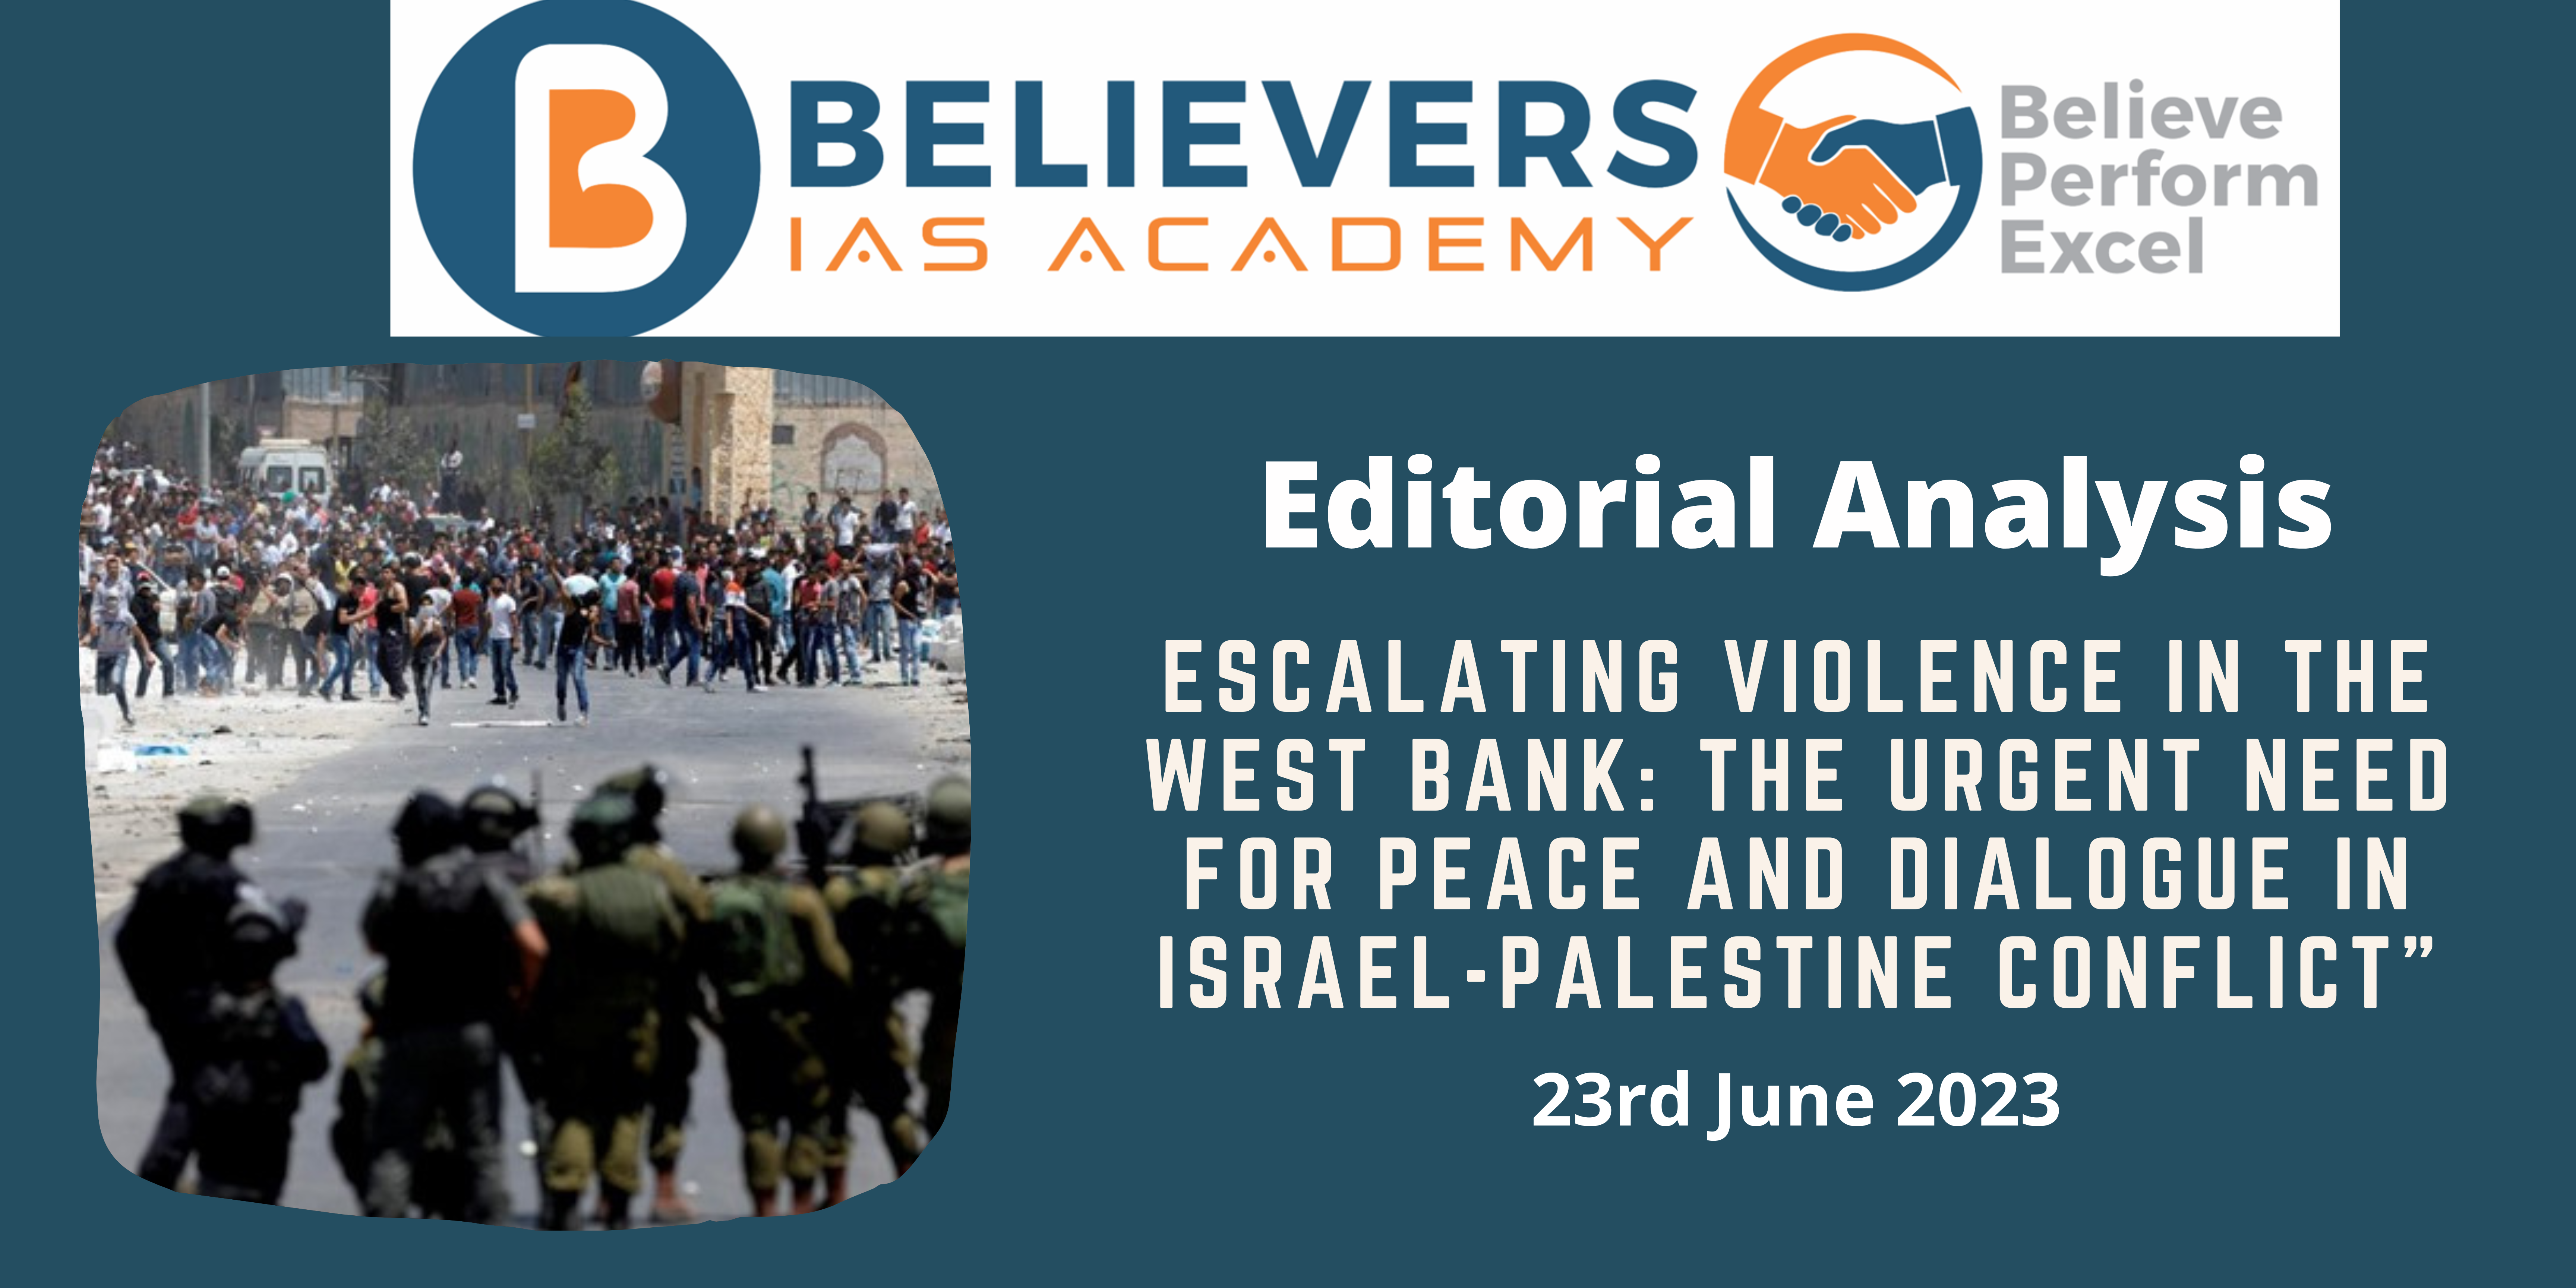 Escalating Violence in the West Bank: The Urgent Need for Peace and Dialogue in Israel-Palestine Conflict"